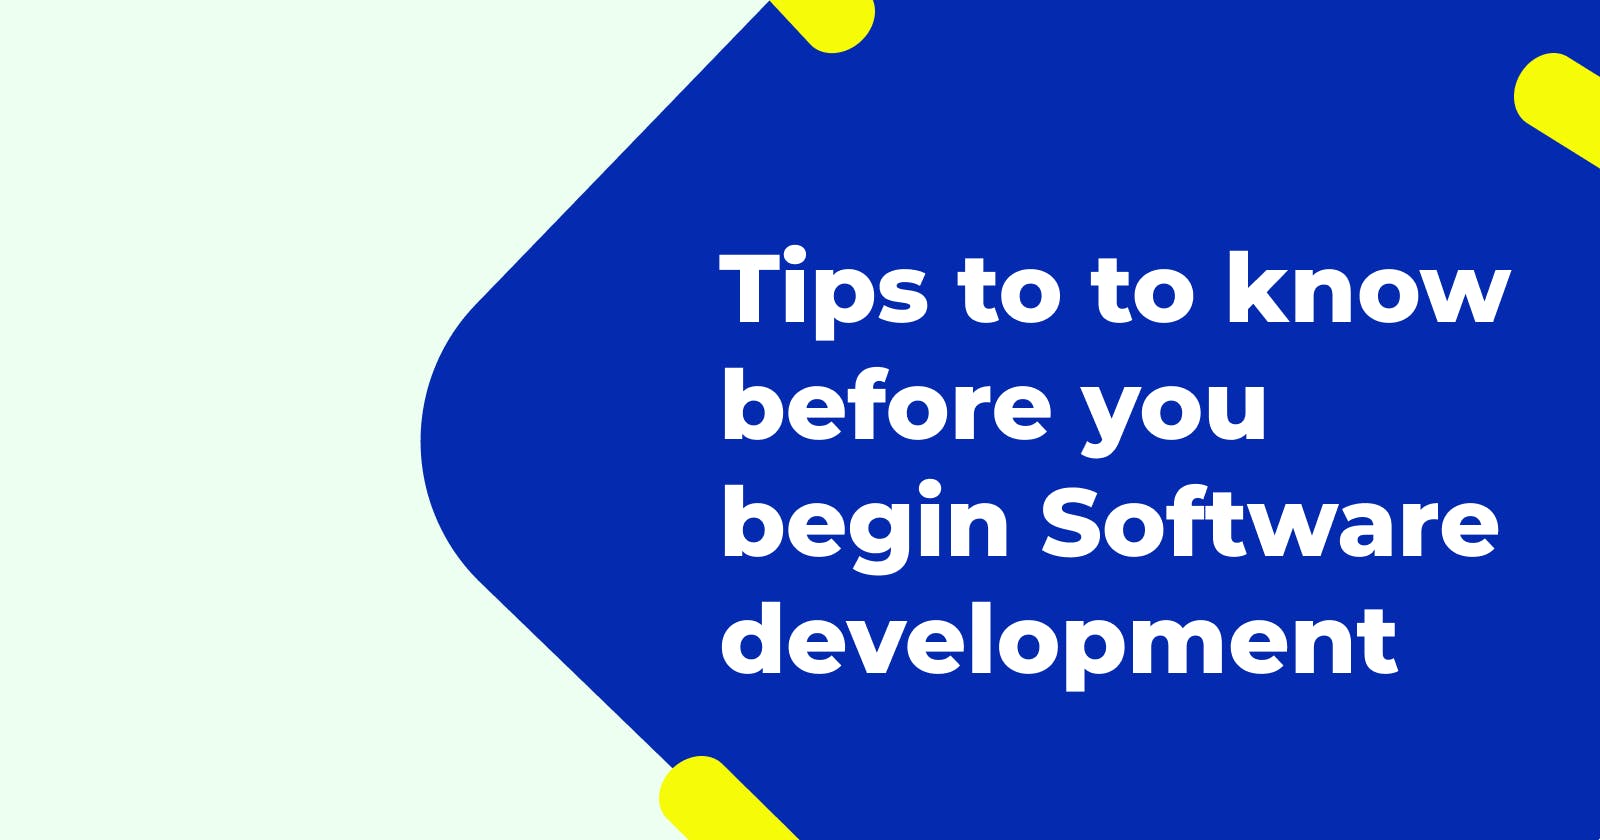 Important things to know before you begin Software development